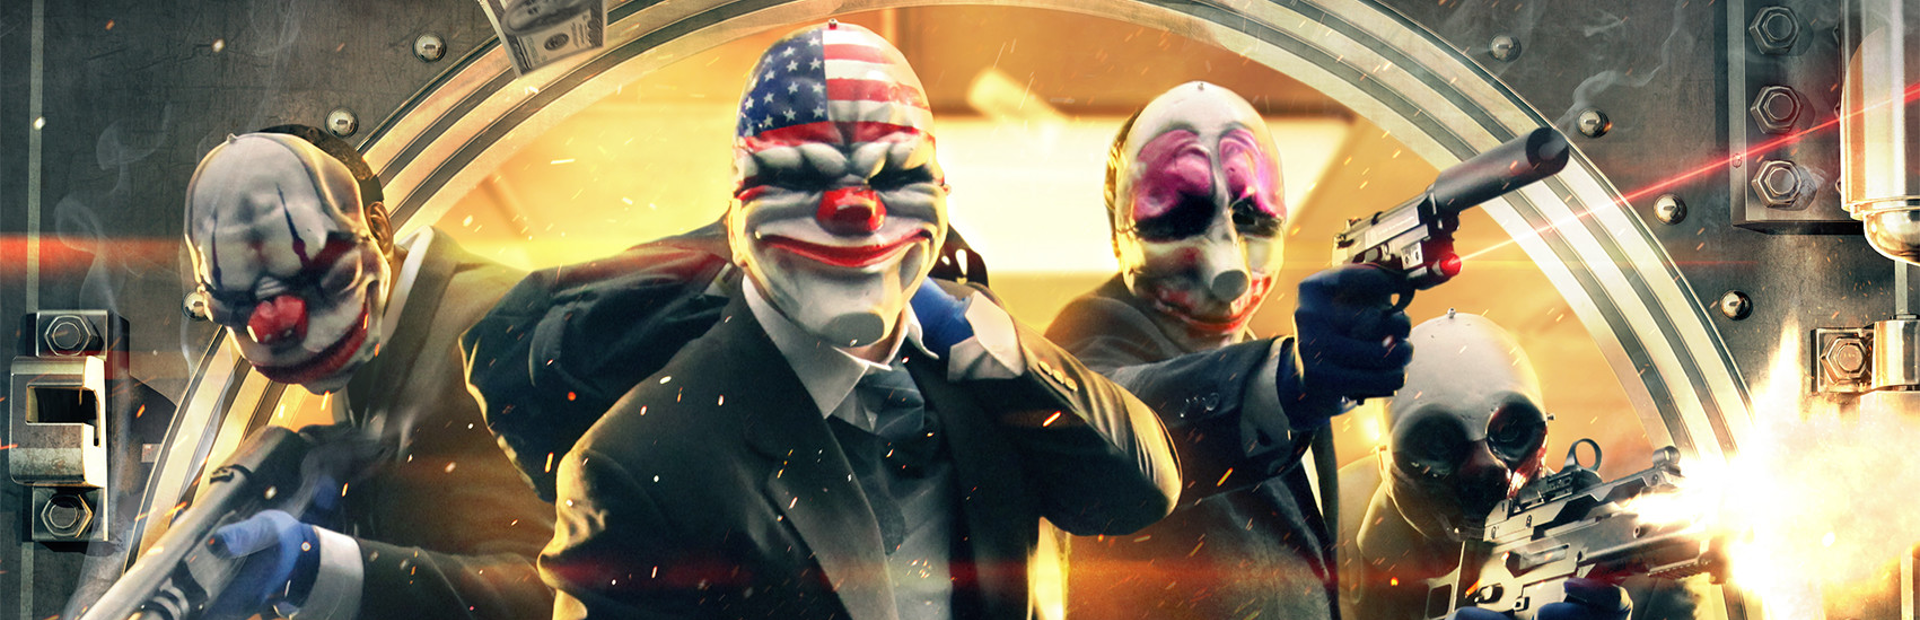 Bank go payday 2 фото 106